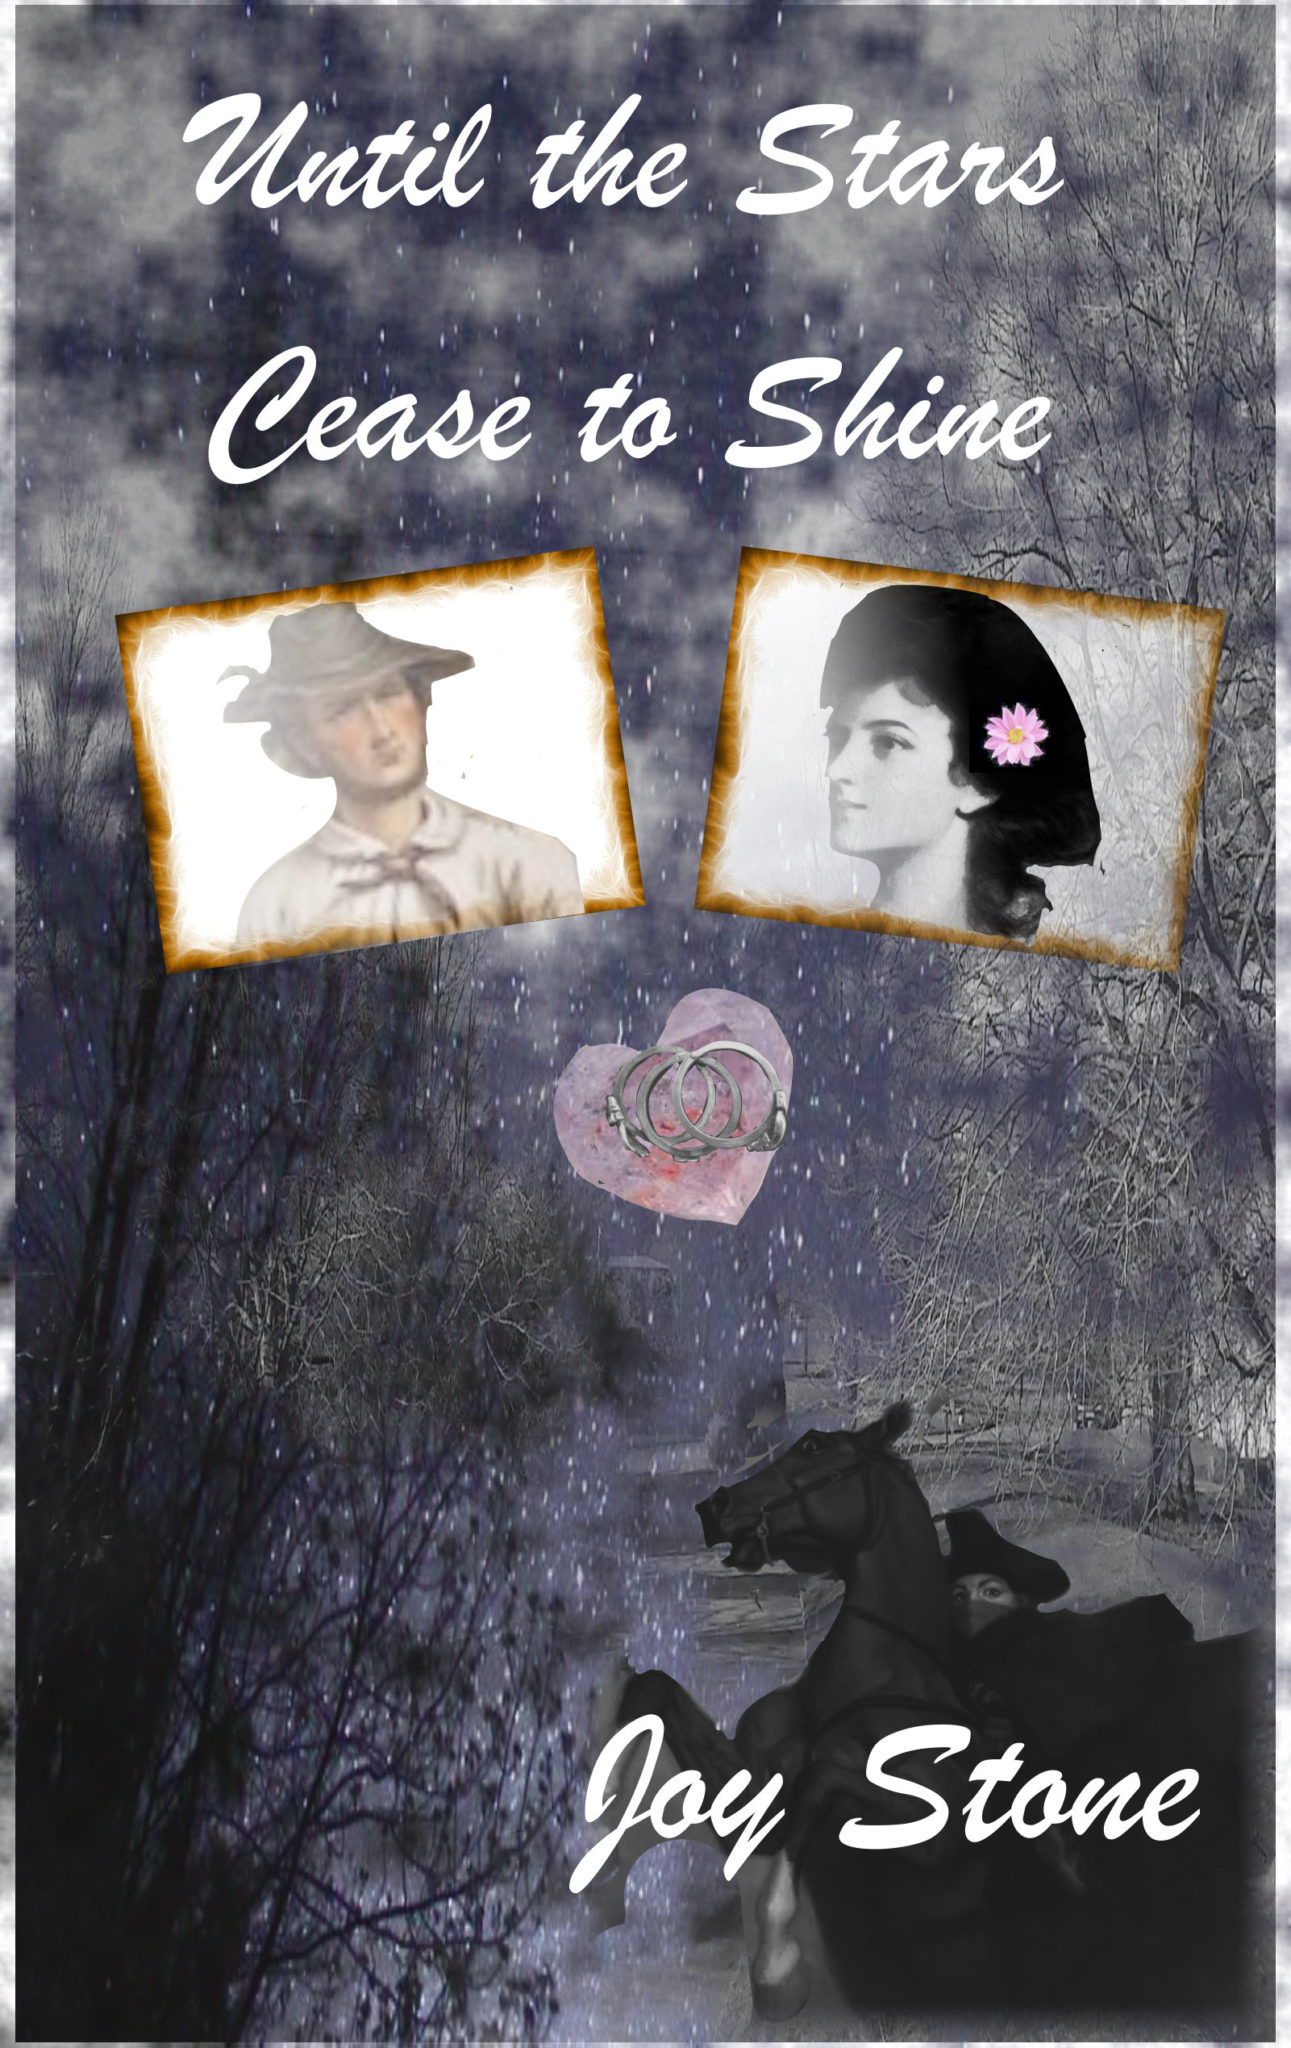 Until the Stars Cease to Shine by Joy Stone